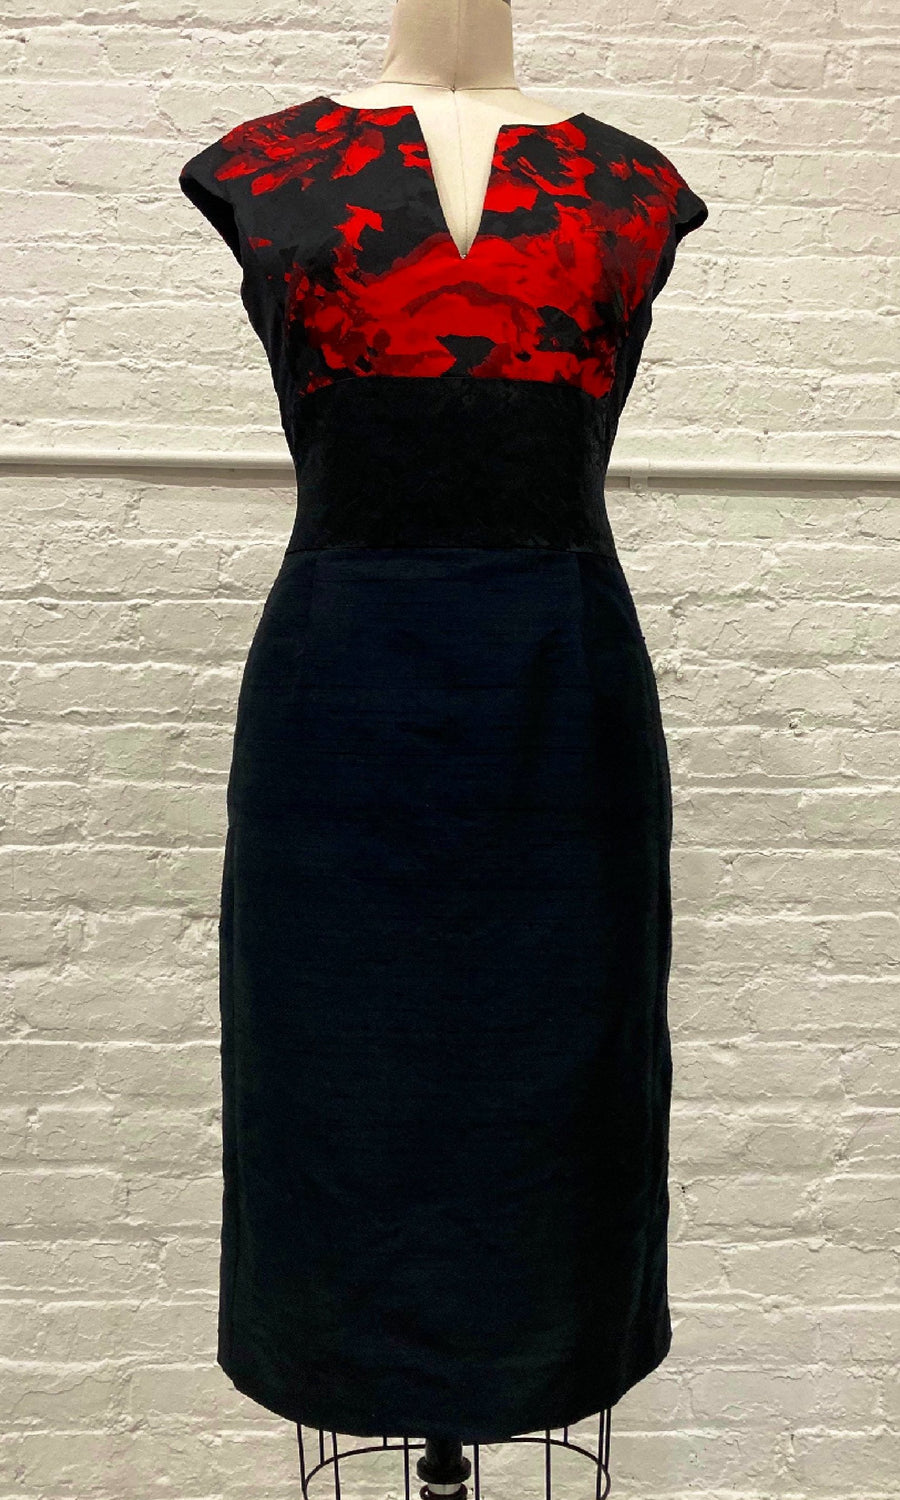 Red & Black Mixed Media Jackie Dress, size Small